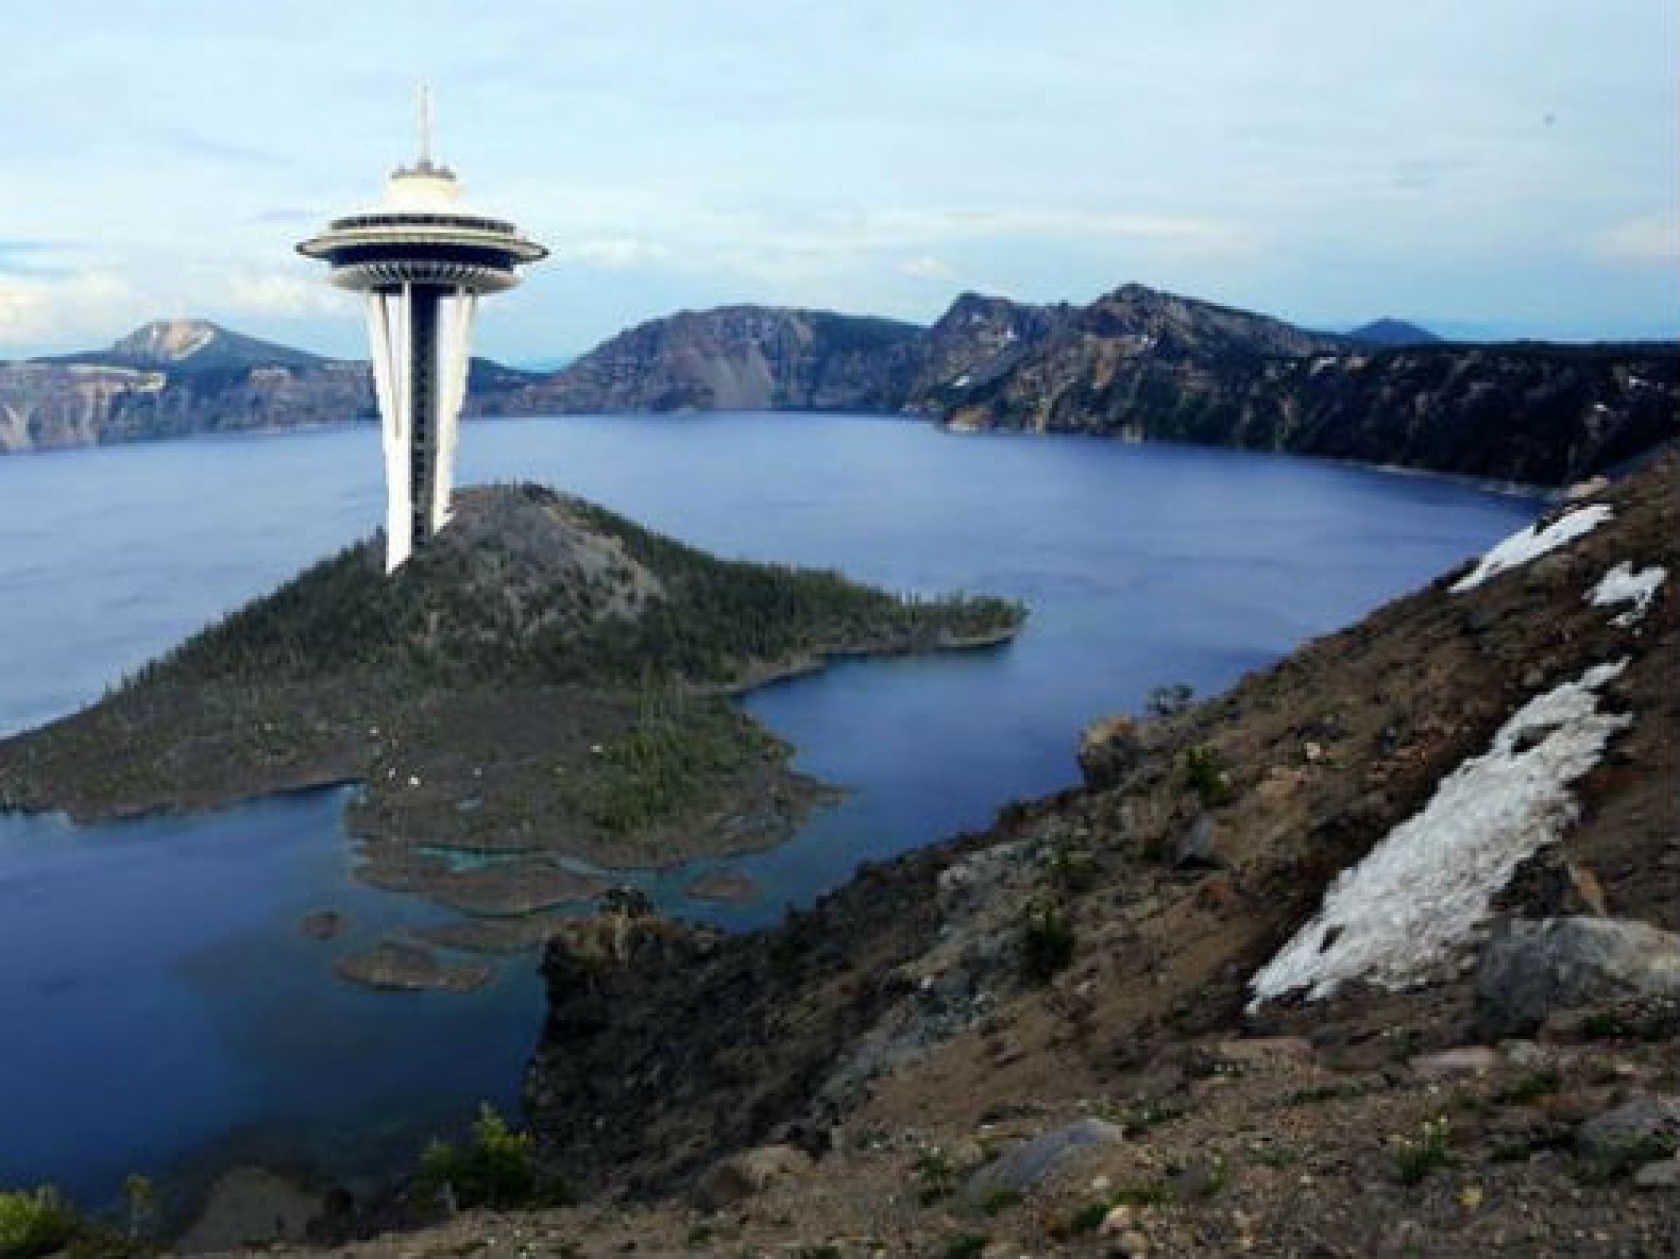 Fake, photoshopped photo of restaurant built on top of Crater lake. 